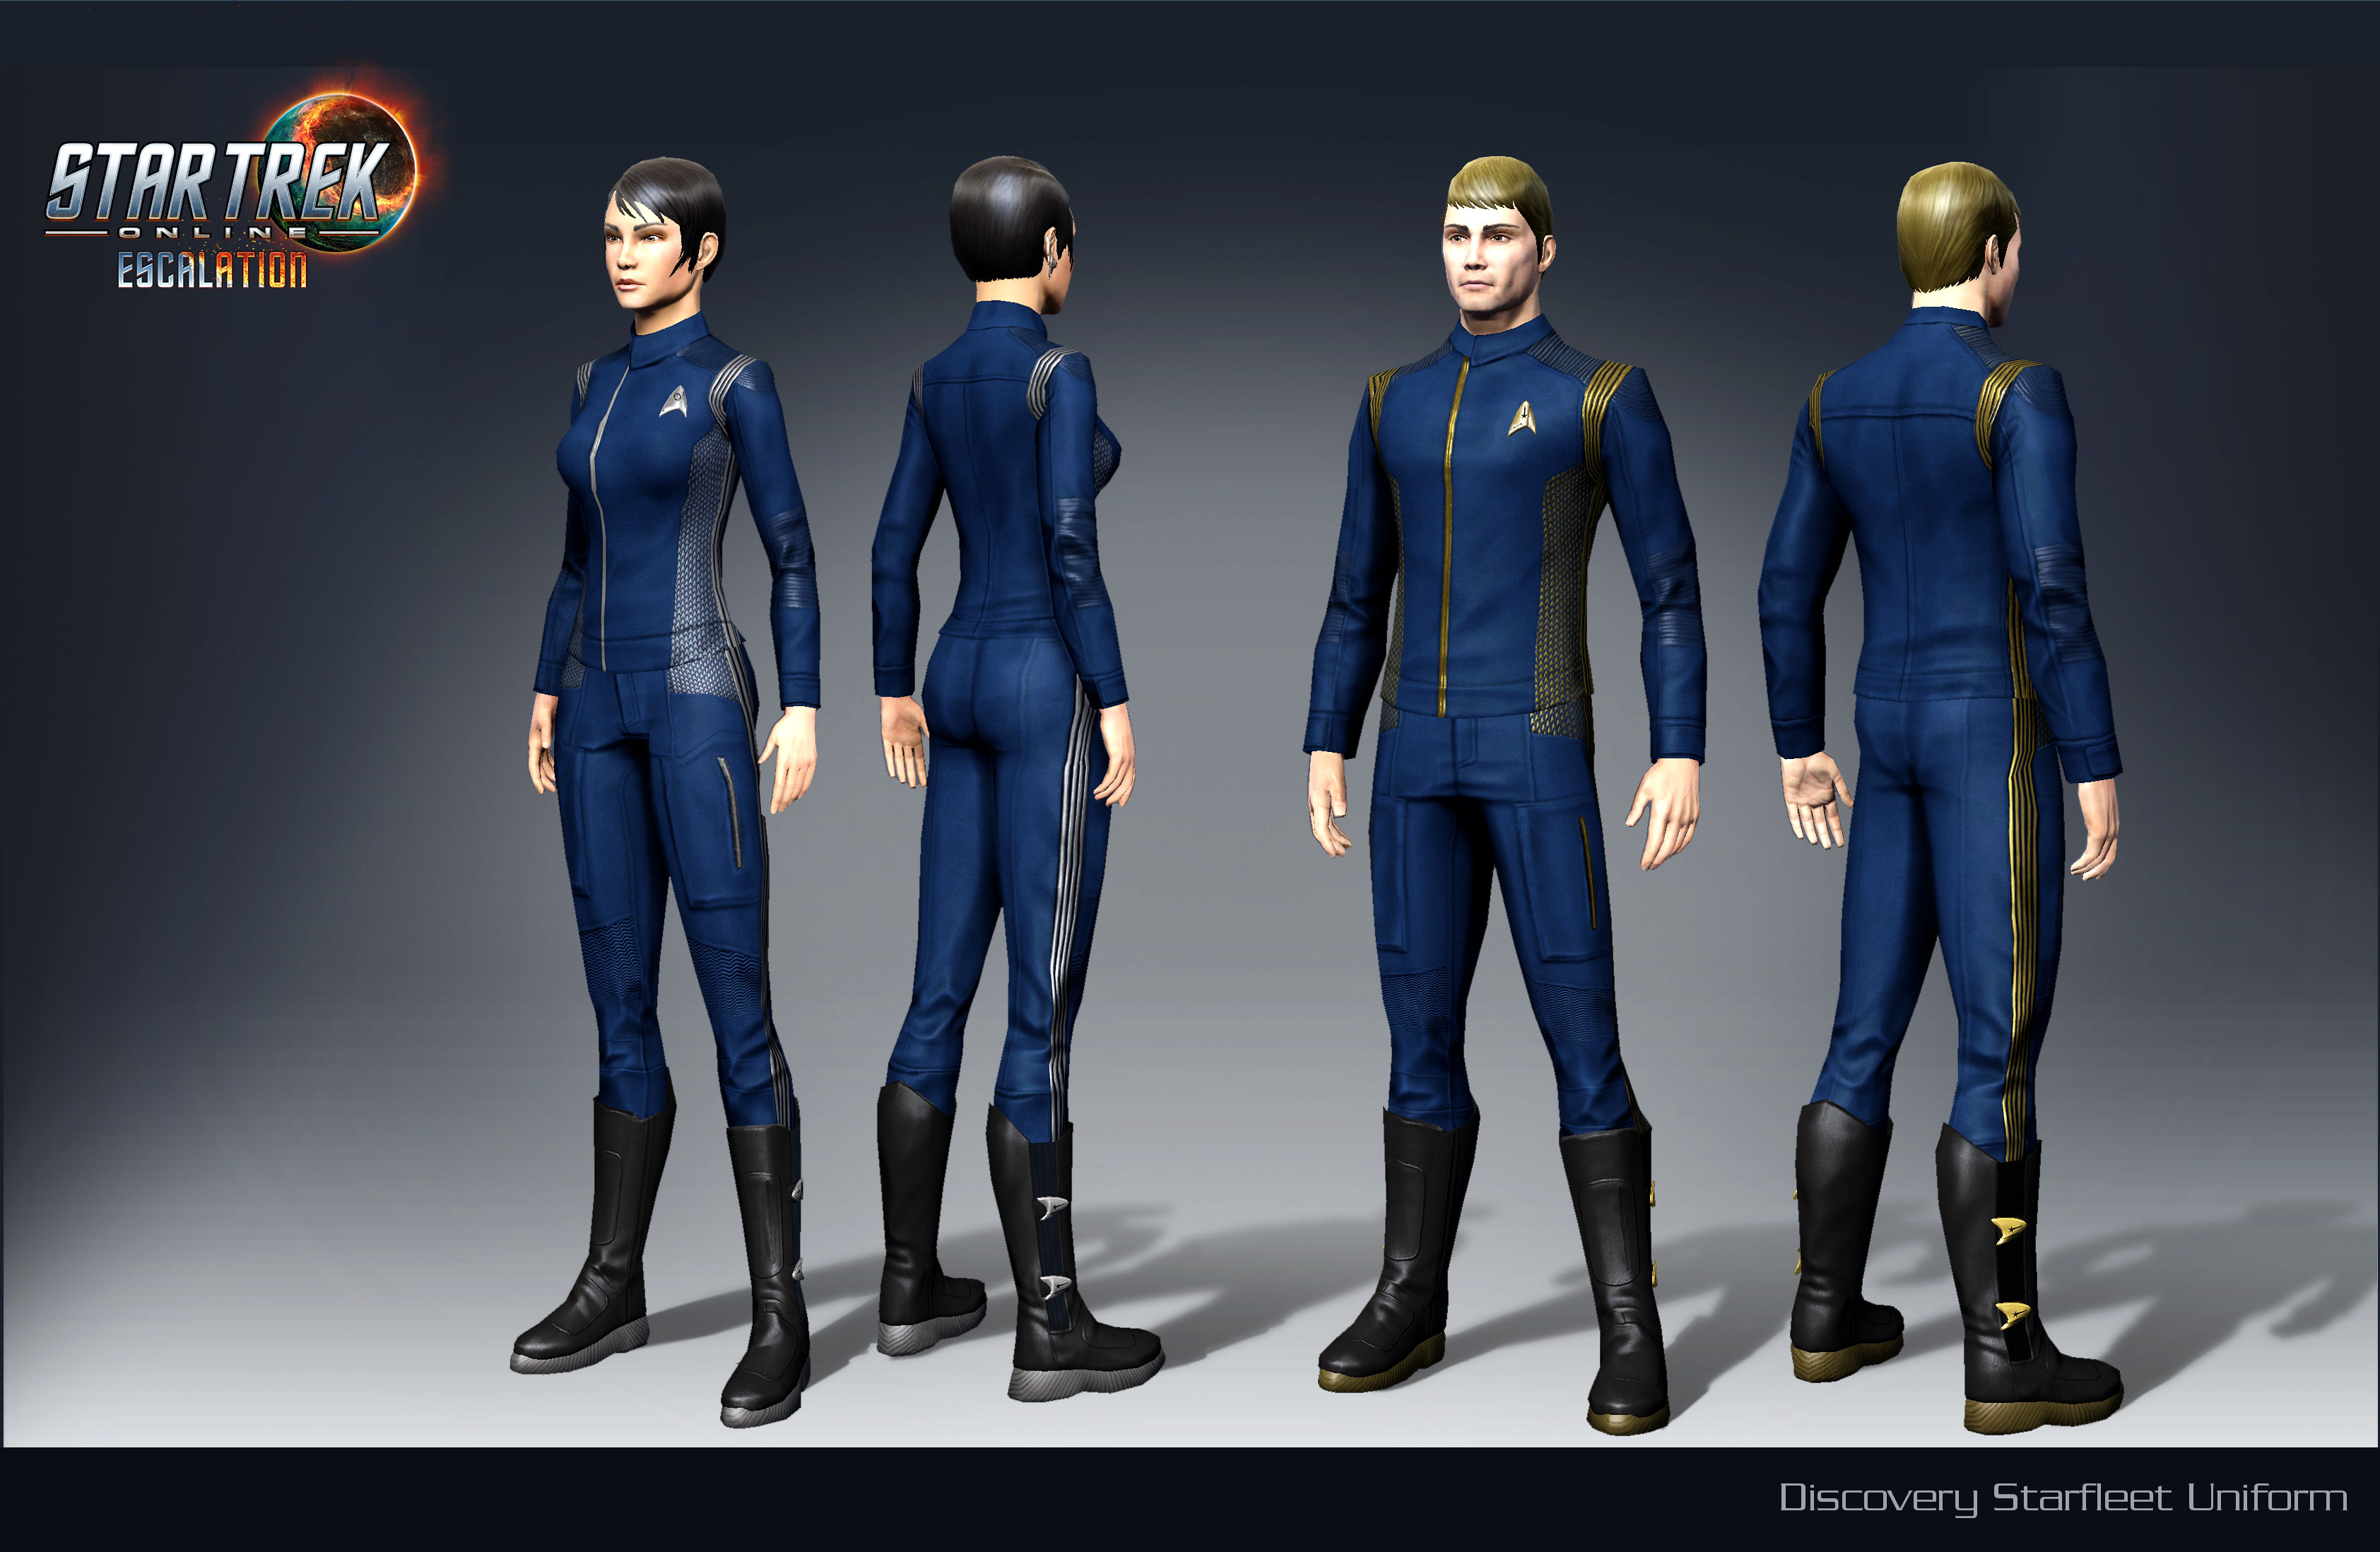 Discovery Uniforms and Type 7 Shuttle Return to PC! Star Trek Online